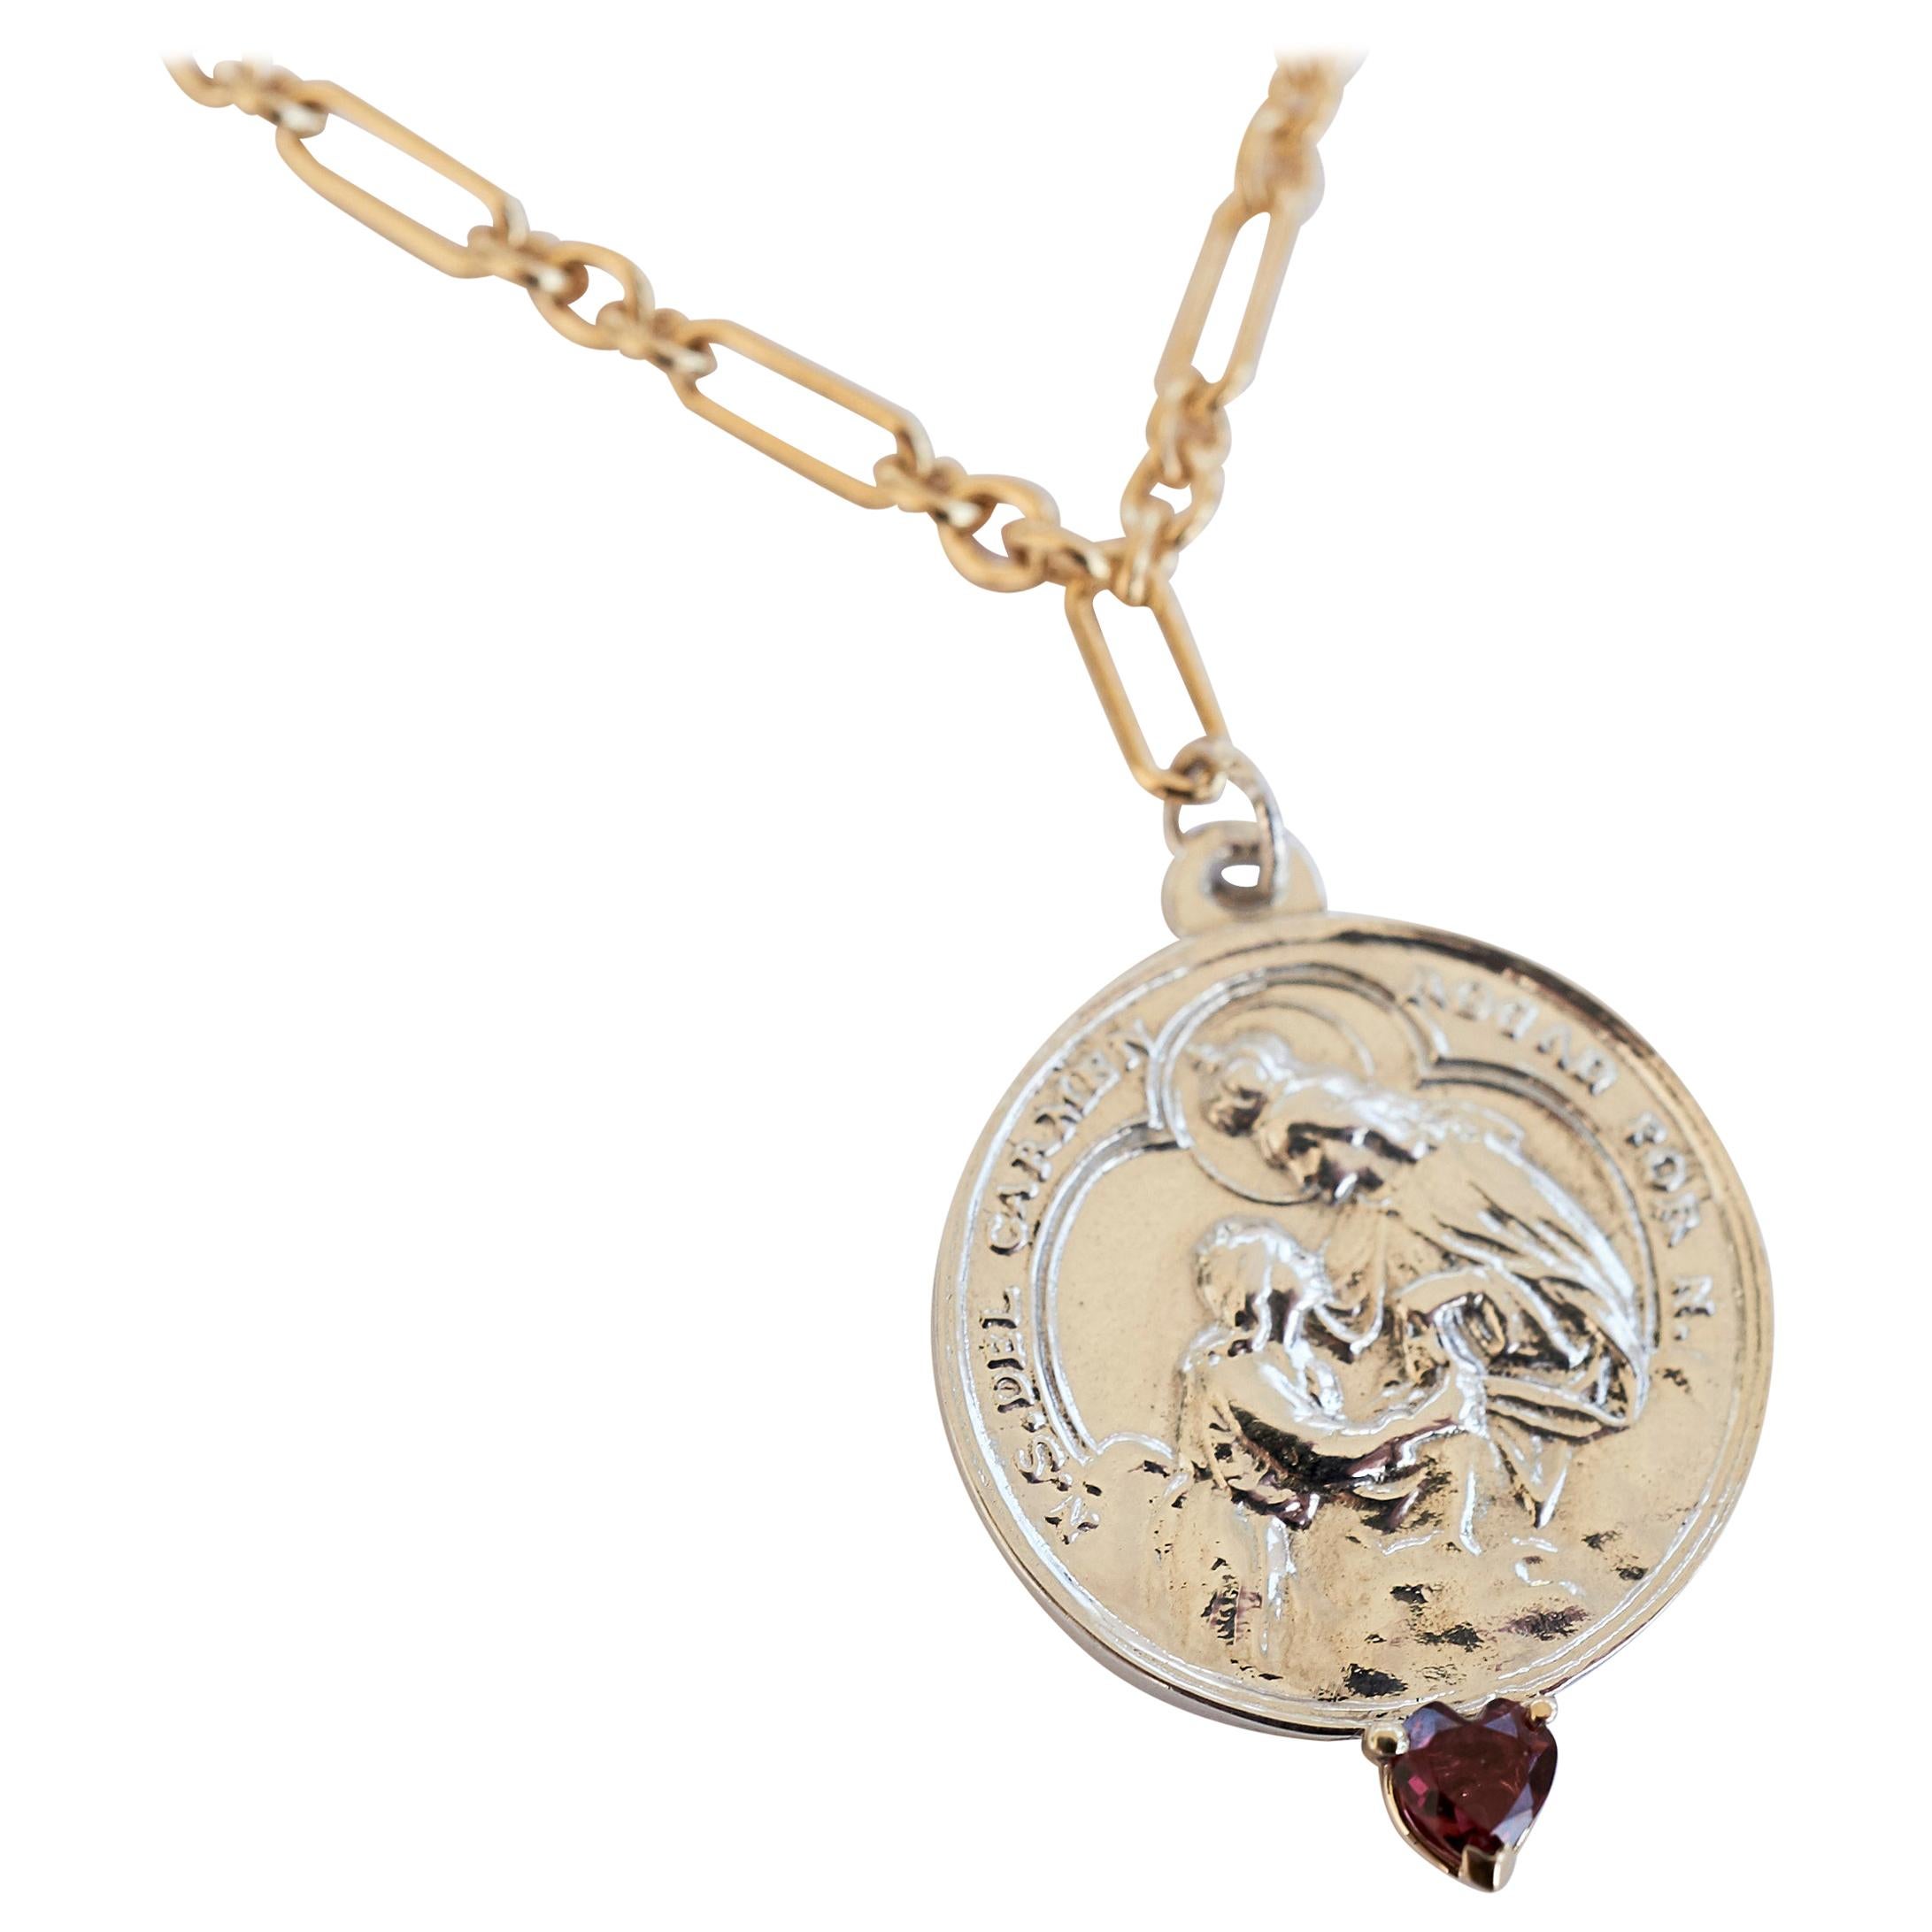 Ruby Heart Virgin del Carmen Medal Coin Silver and Gold Filled Necklace Chain J Dauphin

Exclusive piece with a Round Virgin del Carmen Medal in Silver with a Ruby Heart Cut set in a Gold prong and with a gold filled Chain. Necklace is 24